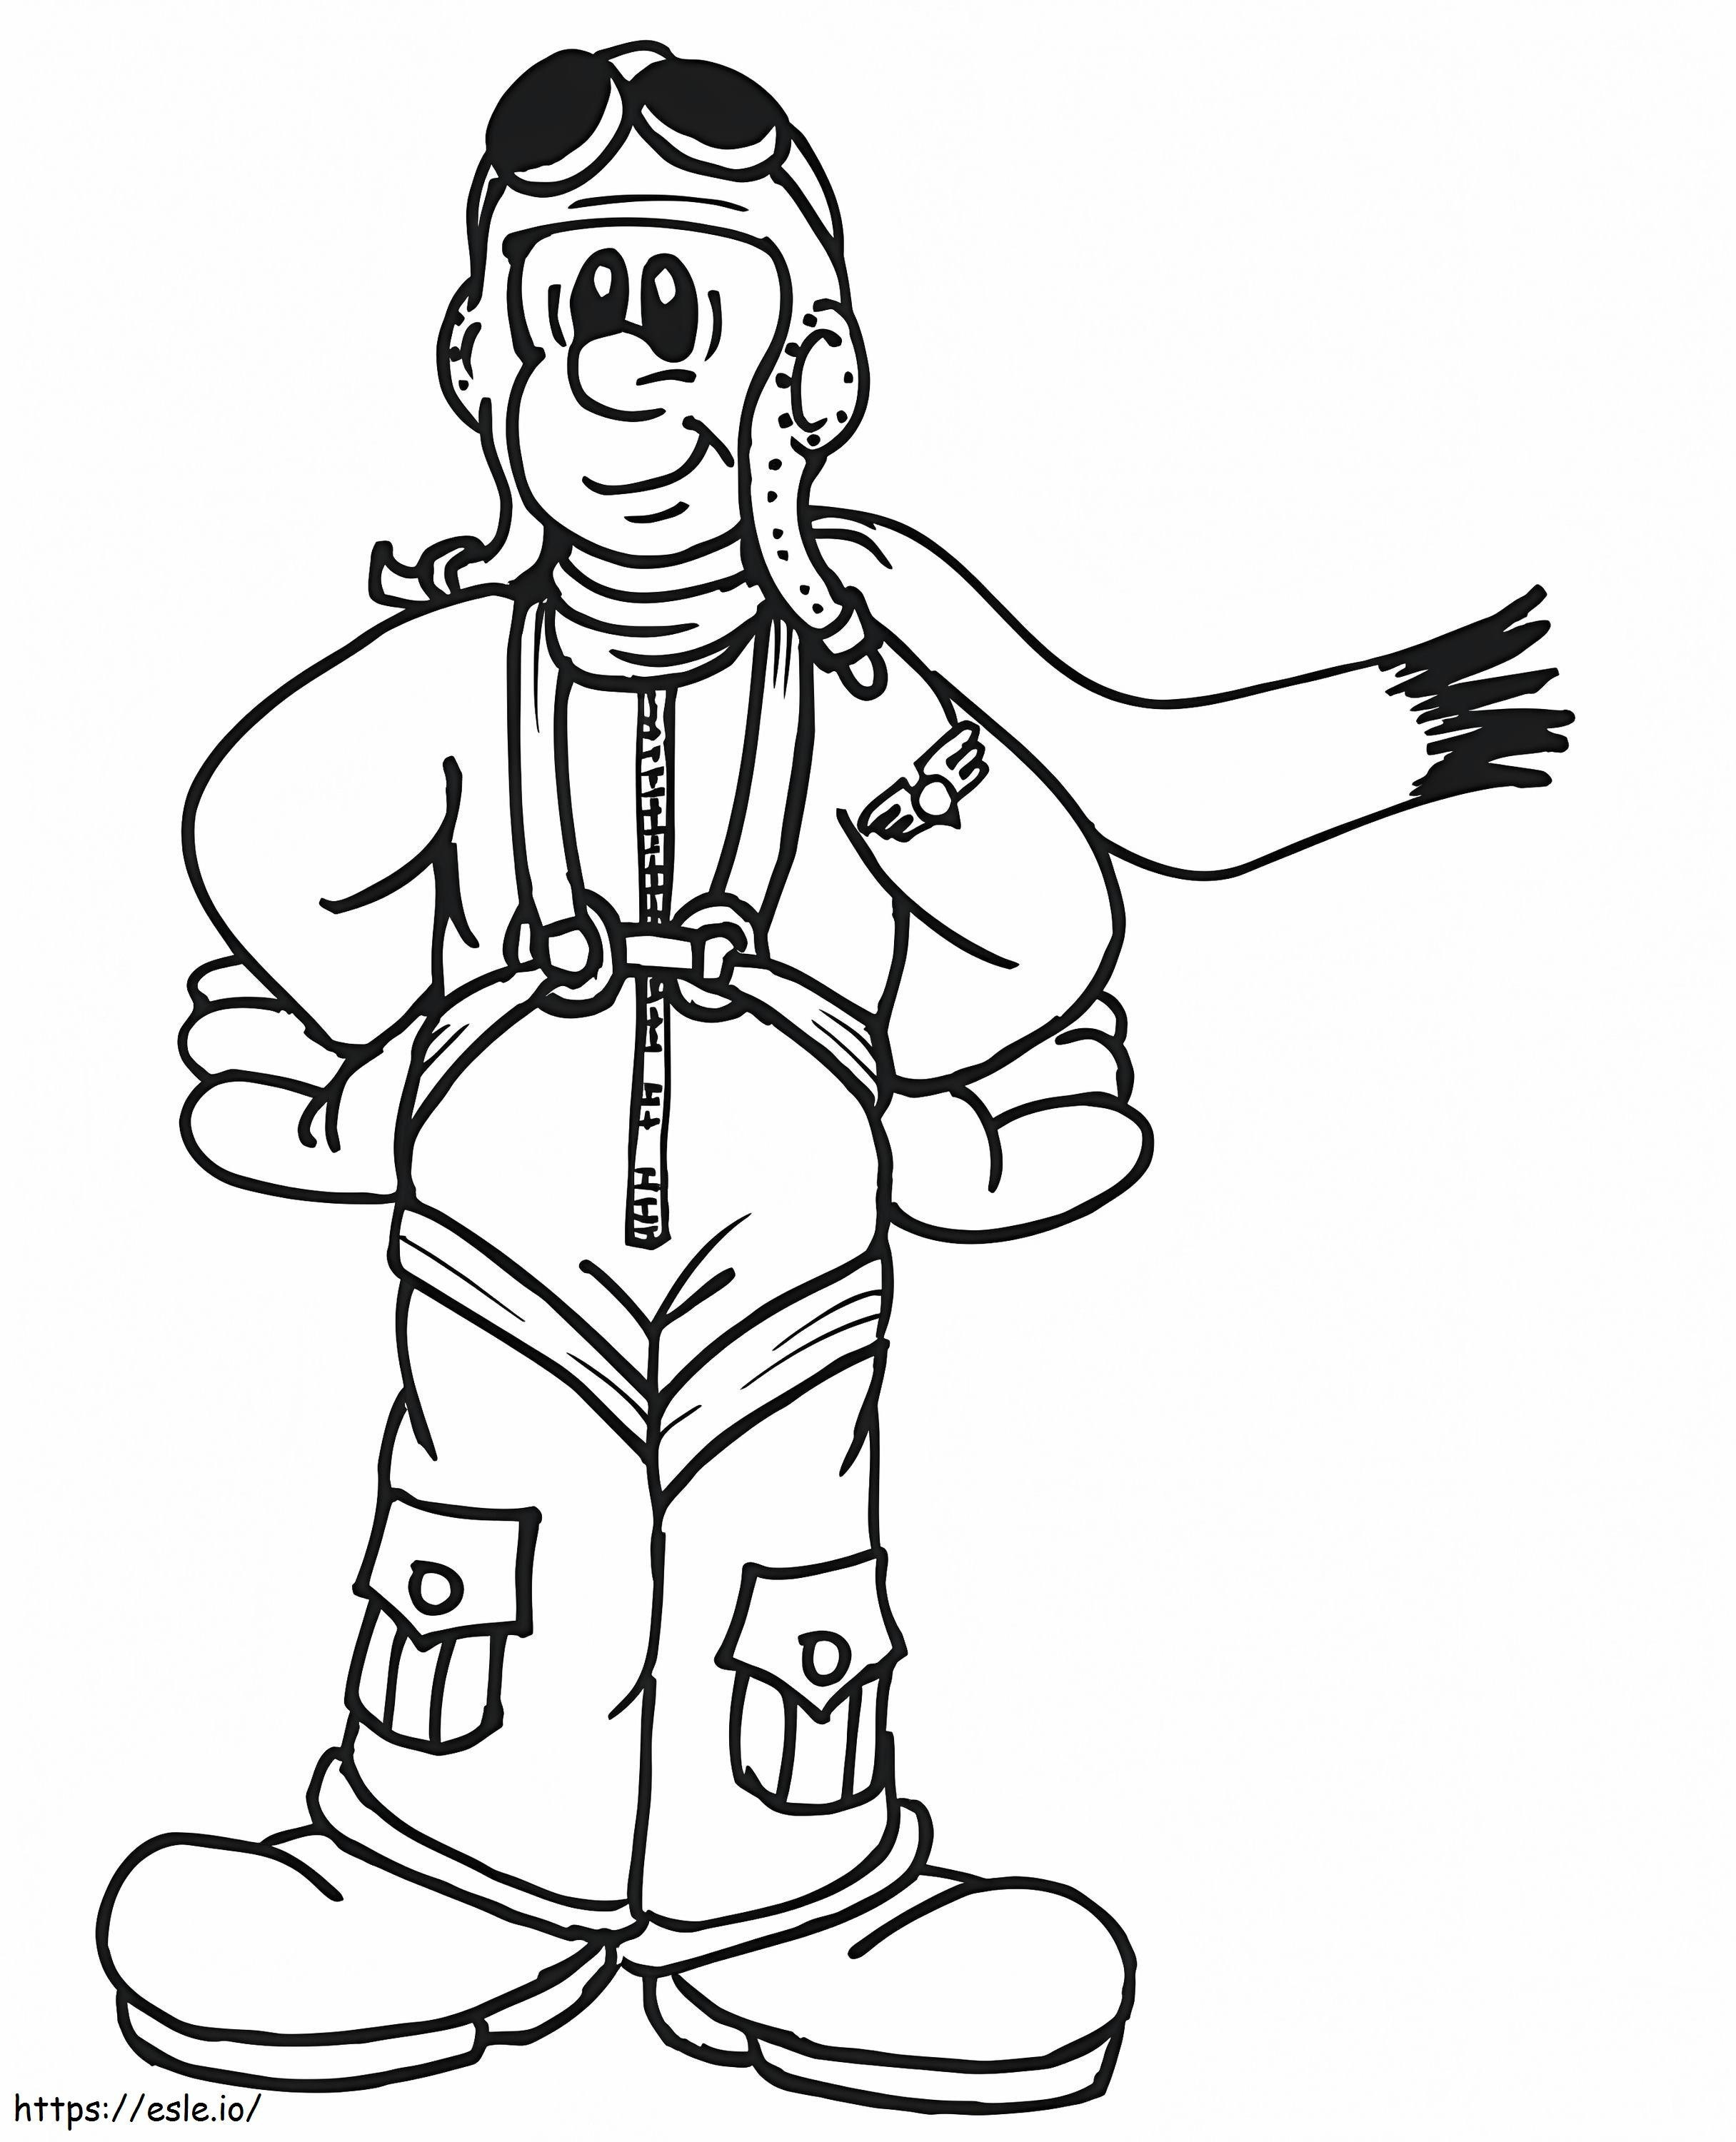 Pilot Is Smiling coloring page